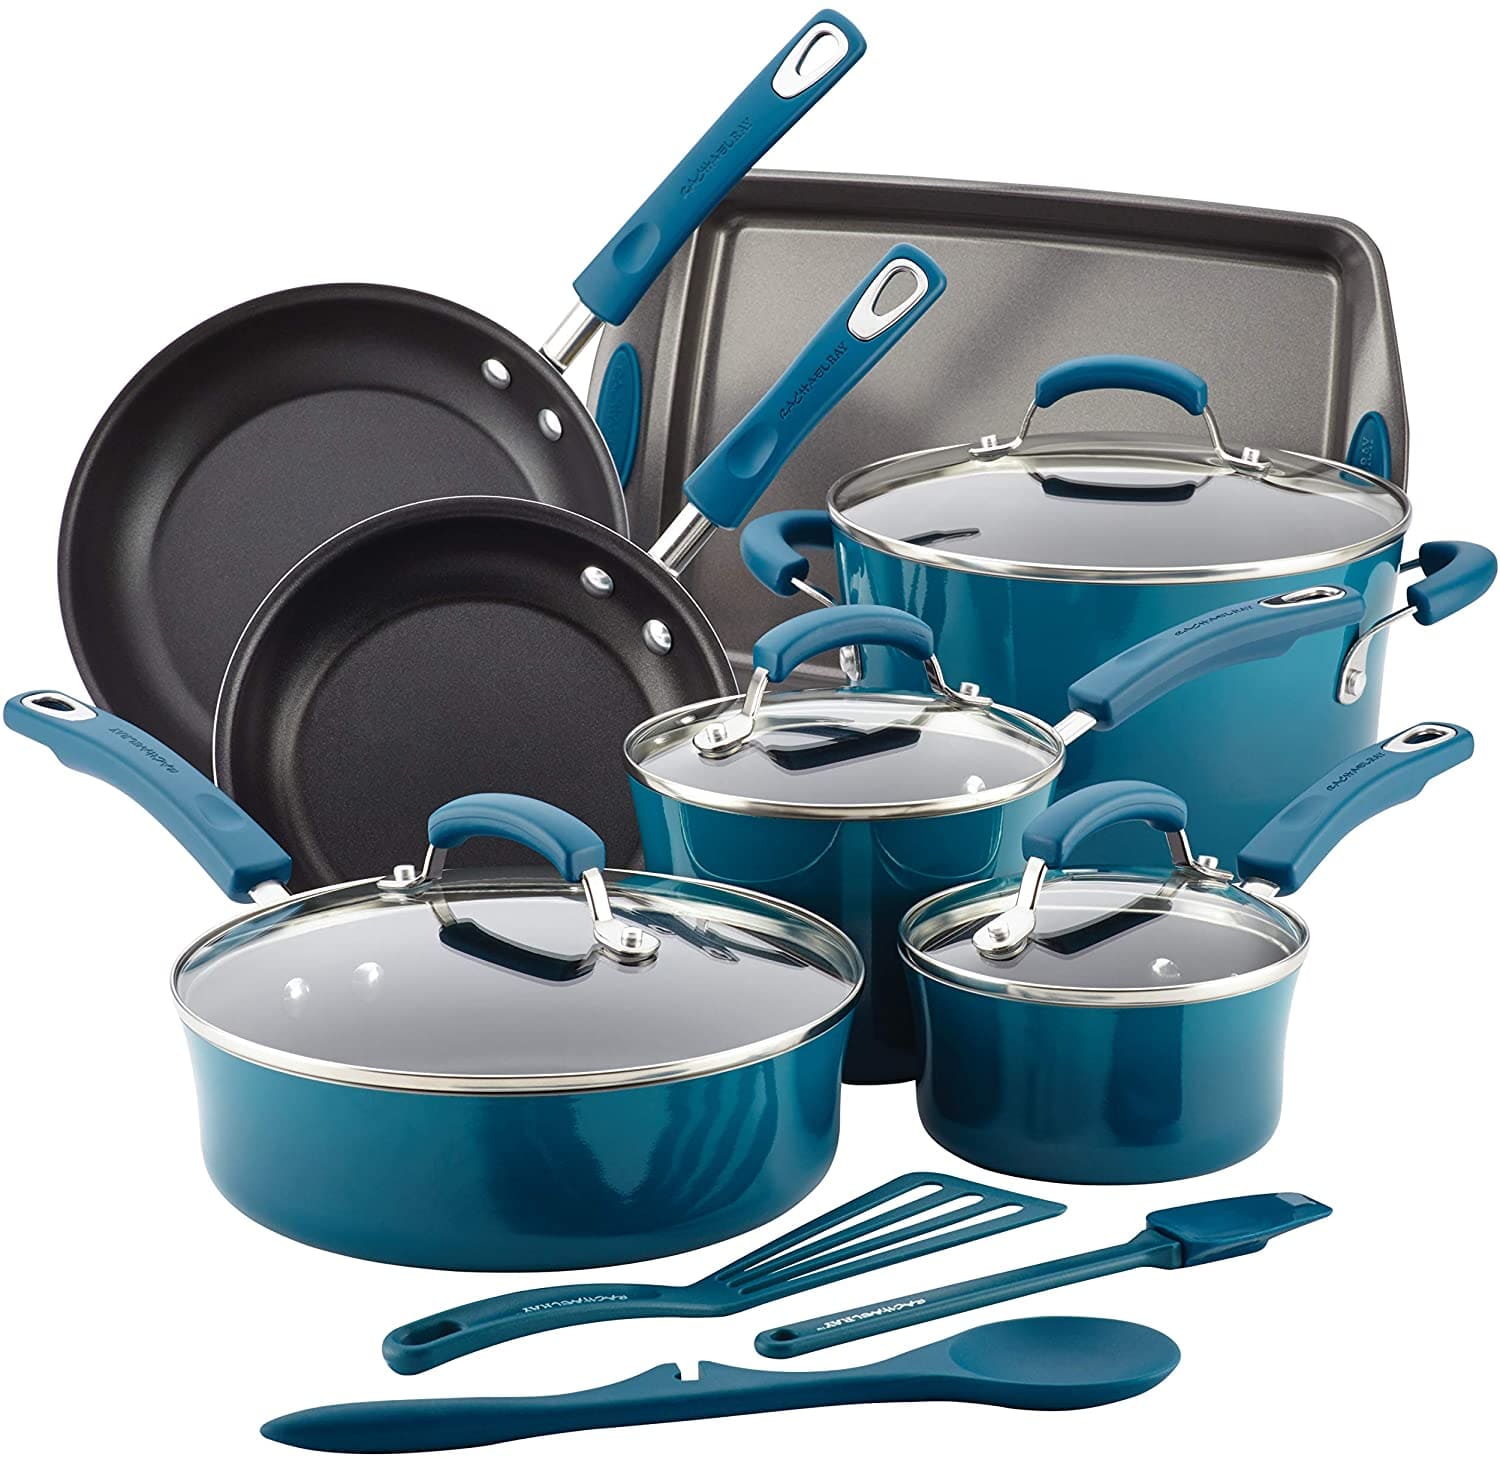 rachael ray brights 14-pc. nonstick cookware set